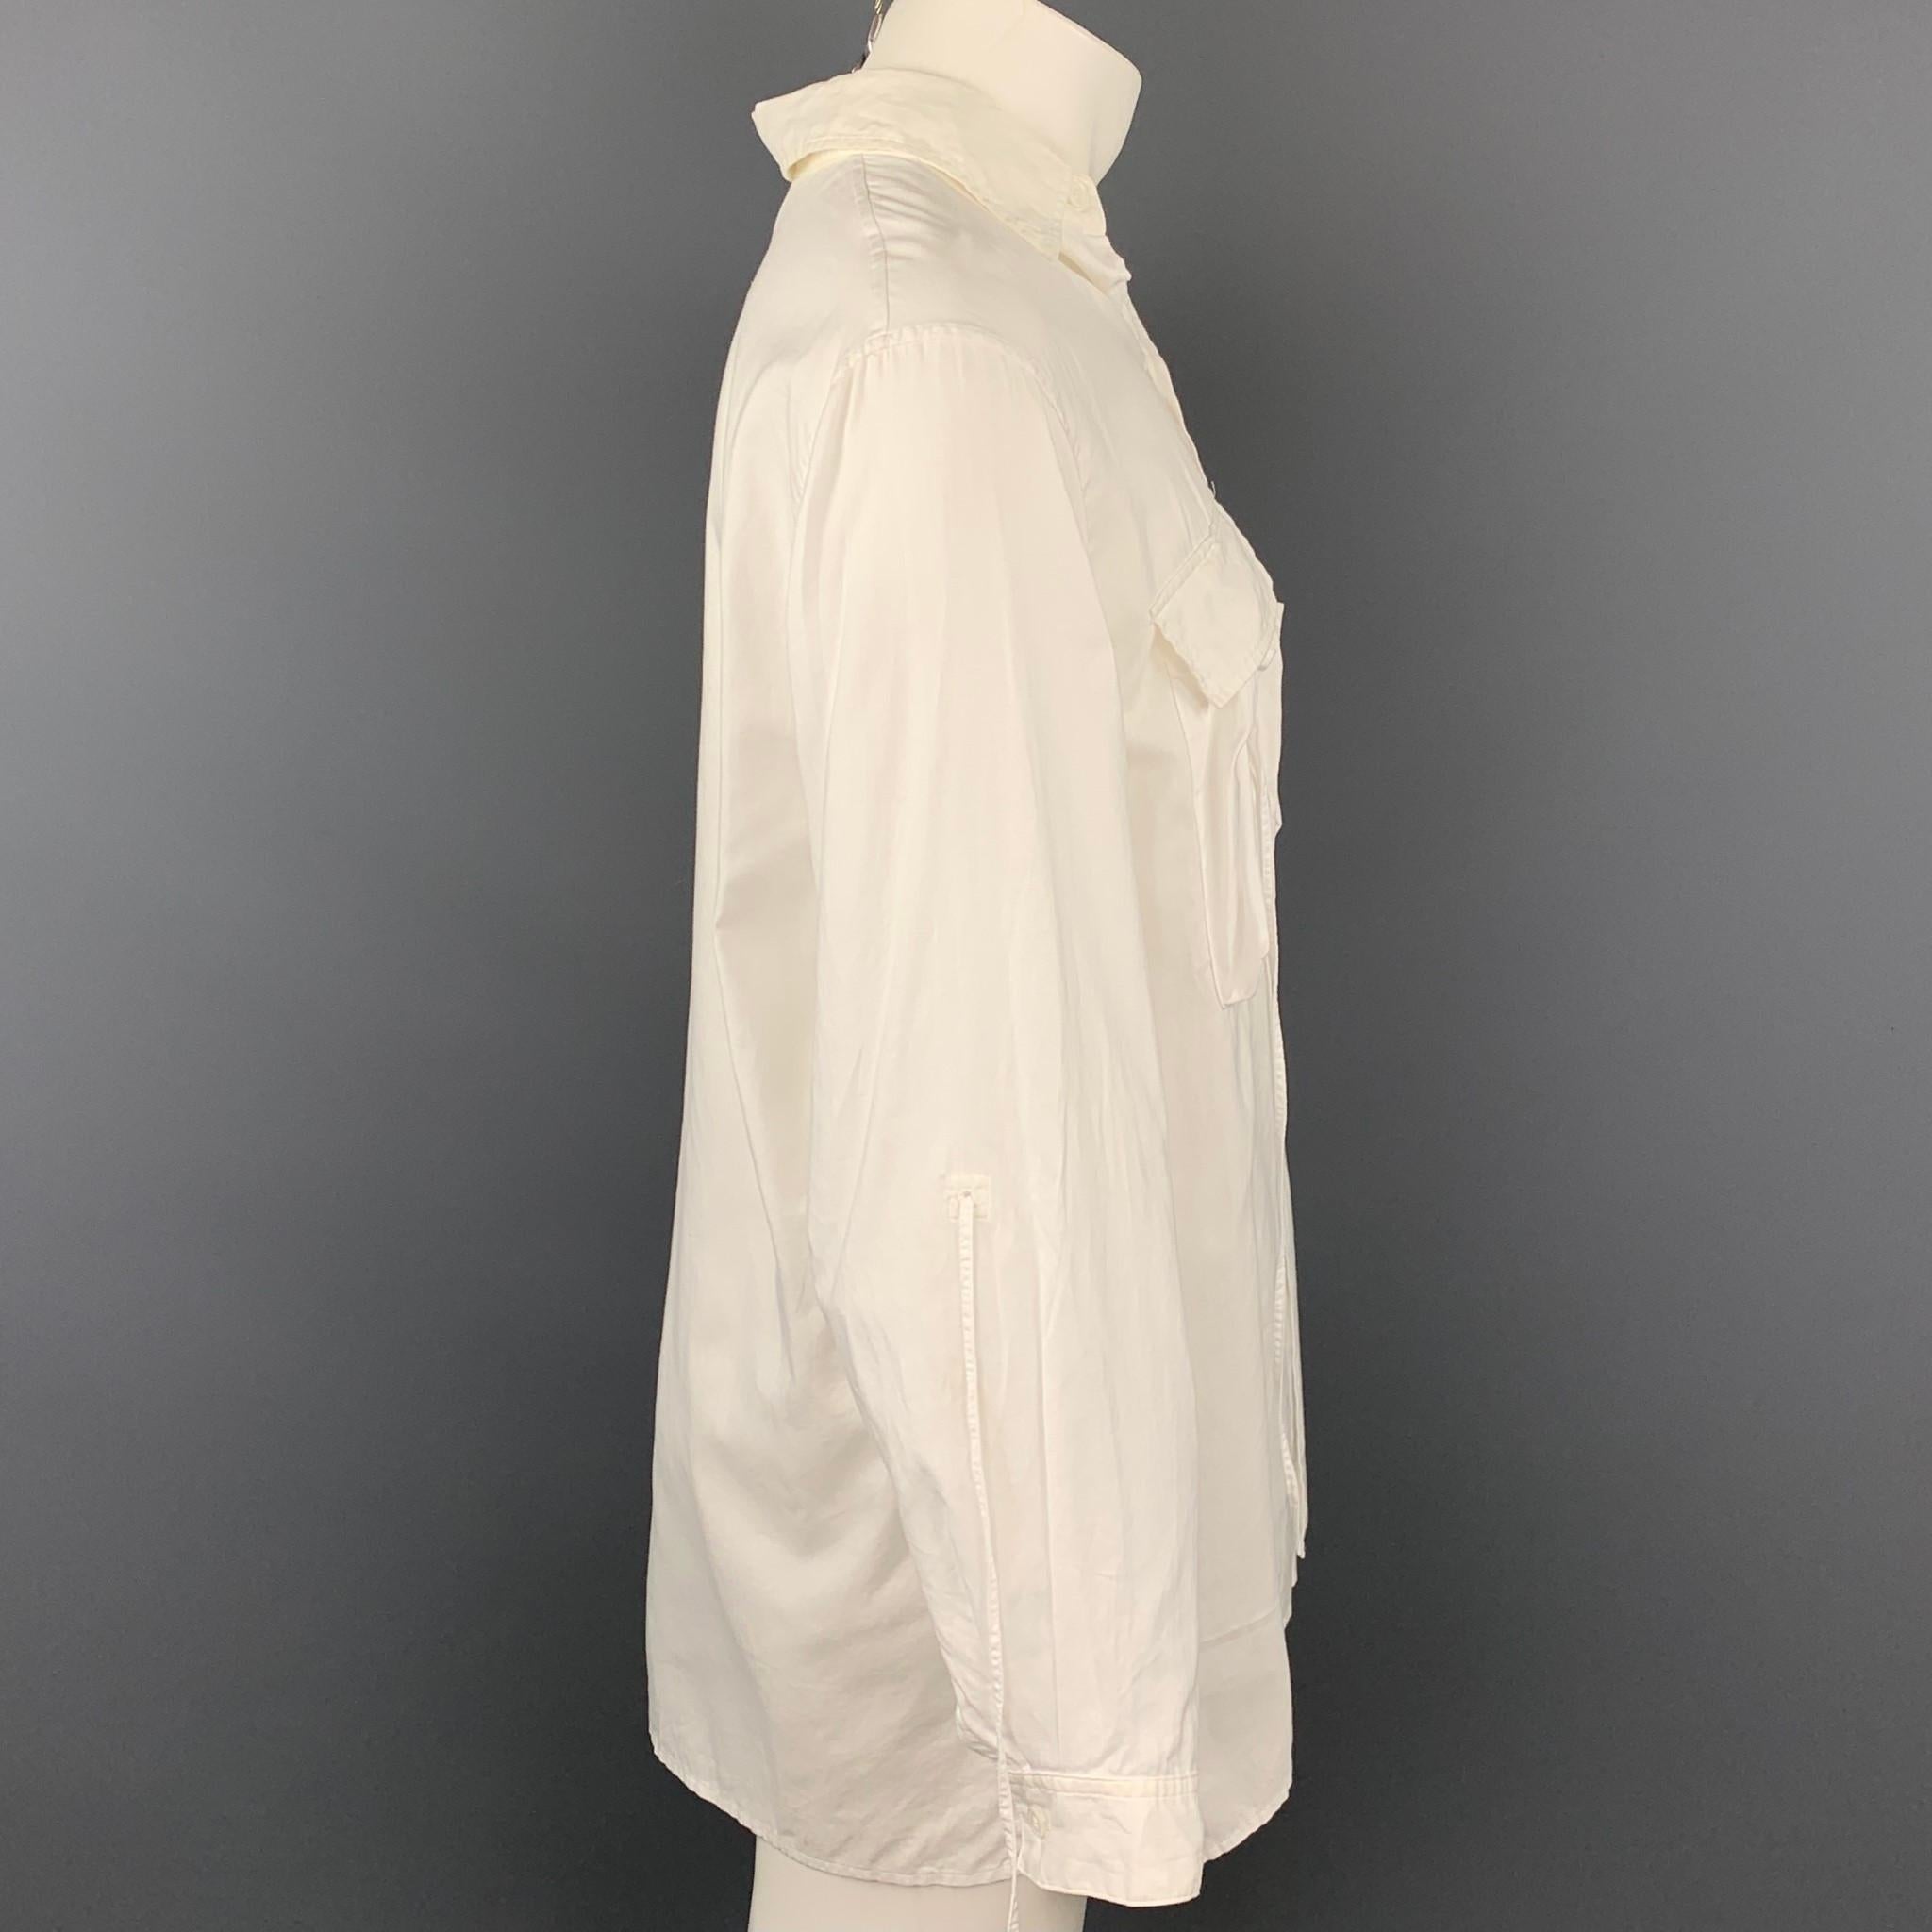 Y's by YOHJI YAMAMOTO long sleeve shirt comes in a white cotton featuring a oversized button up style, patch pockets, drawstring detail, and a spread collar. Made in Japan.

Very Good Pre-Owned Condition.
Marked: 1

Measurements:

Shoulder: 18